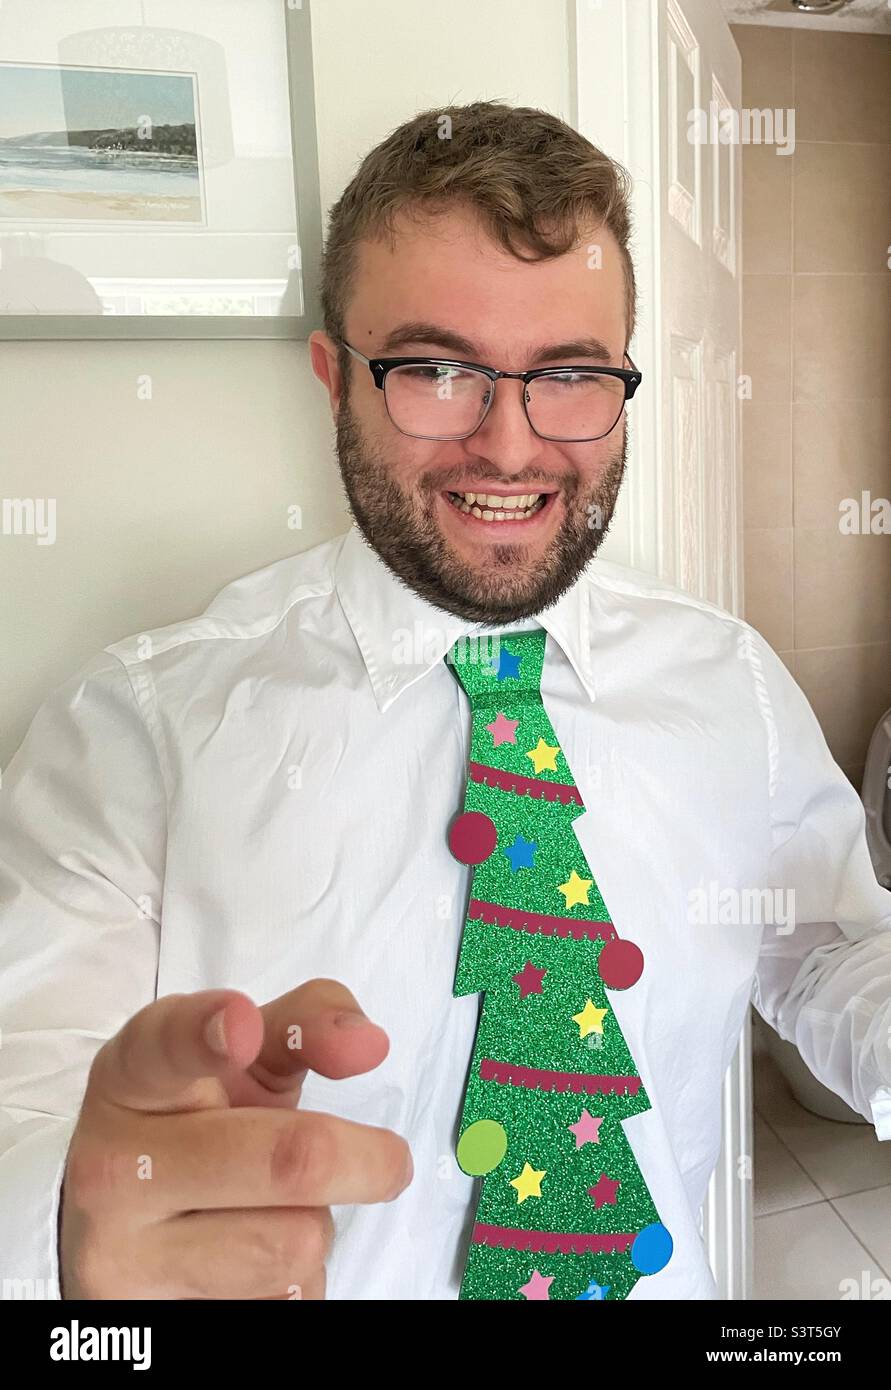 The office joker in a funny tie Stock Photo